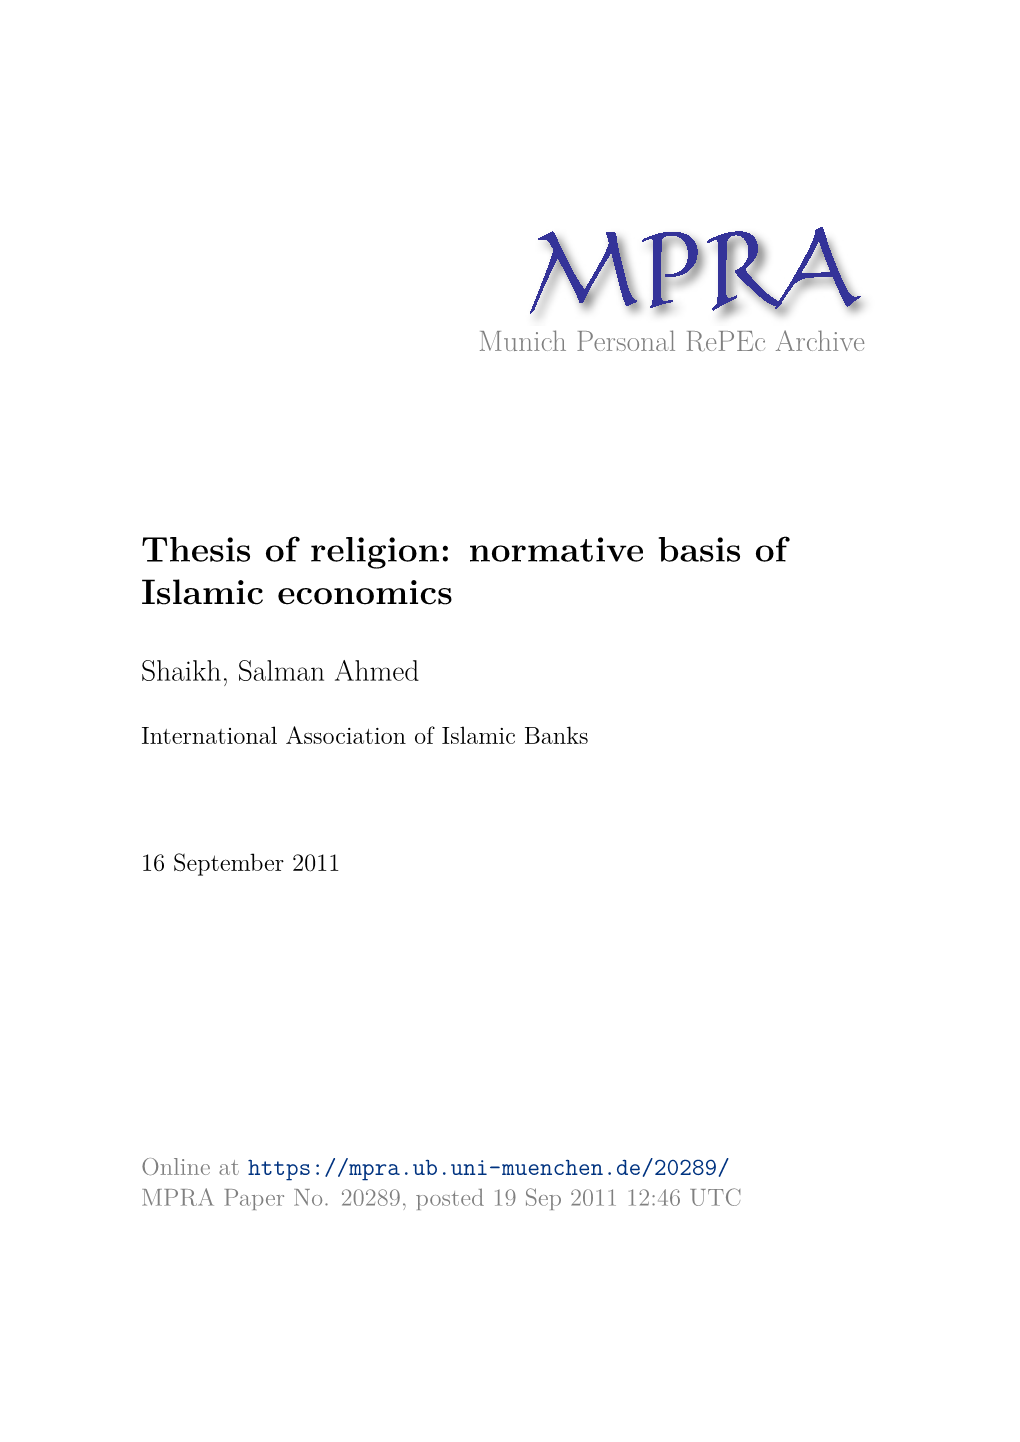 Thesis of Religion: Normative Basis of Islamic Economics